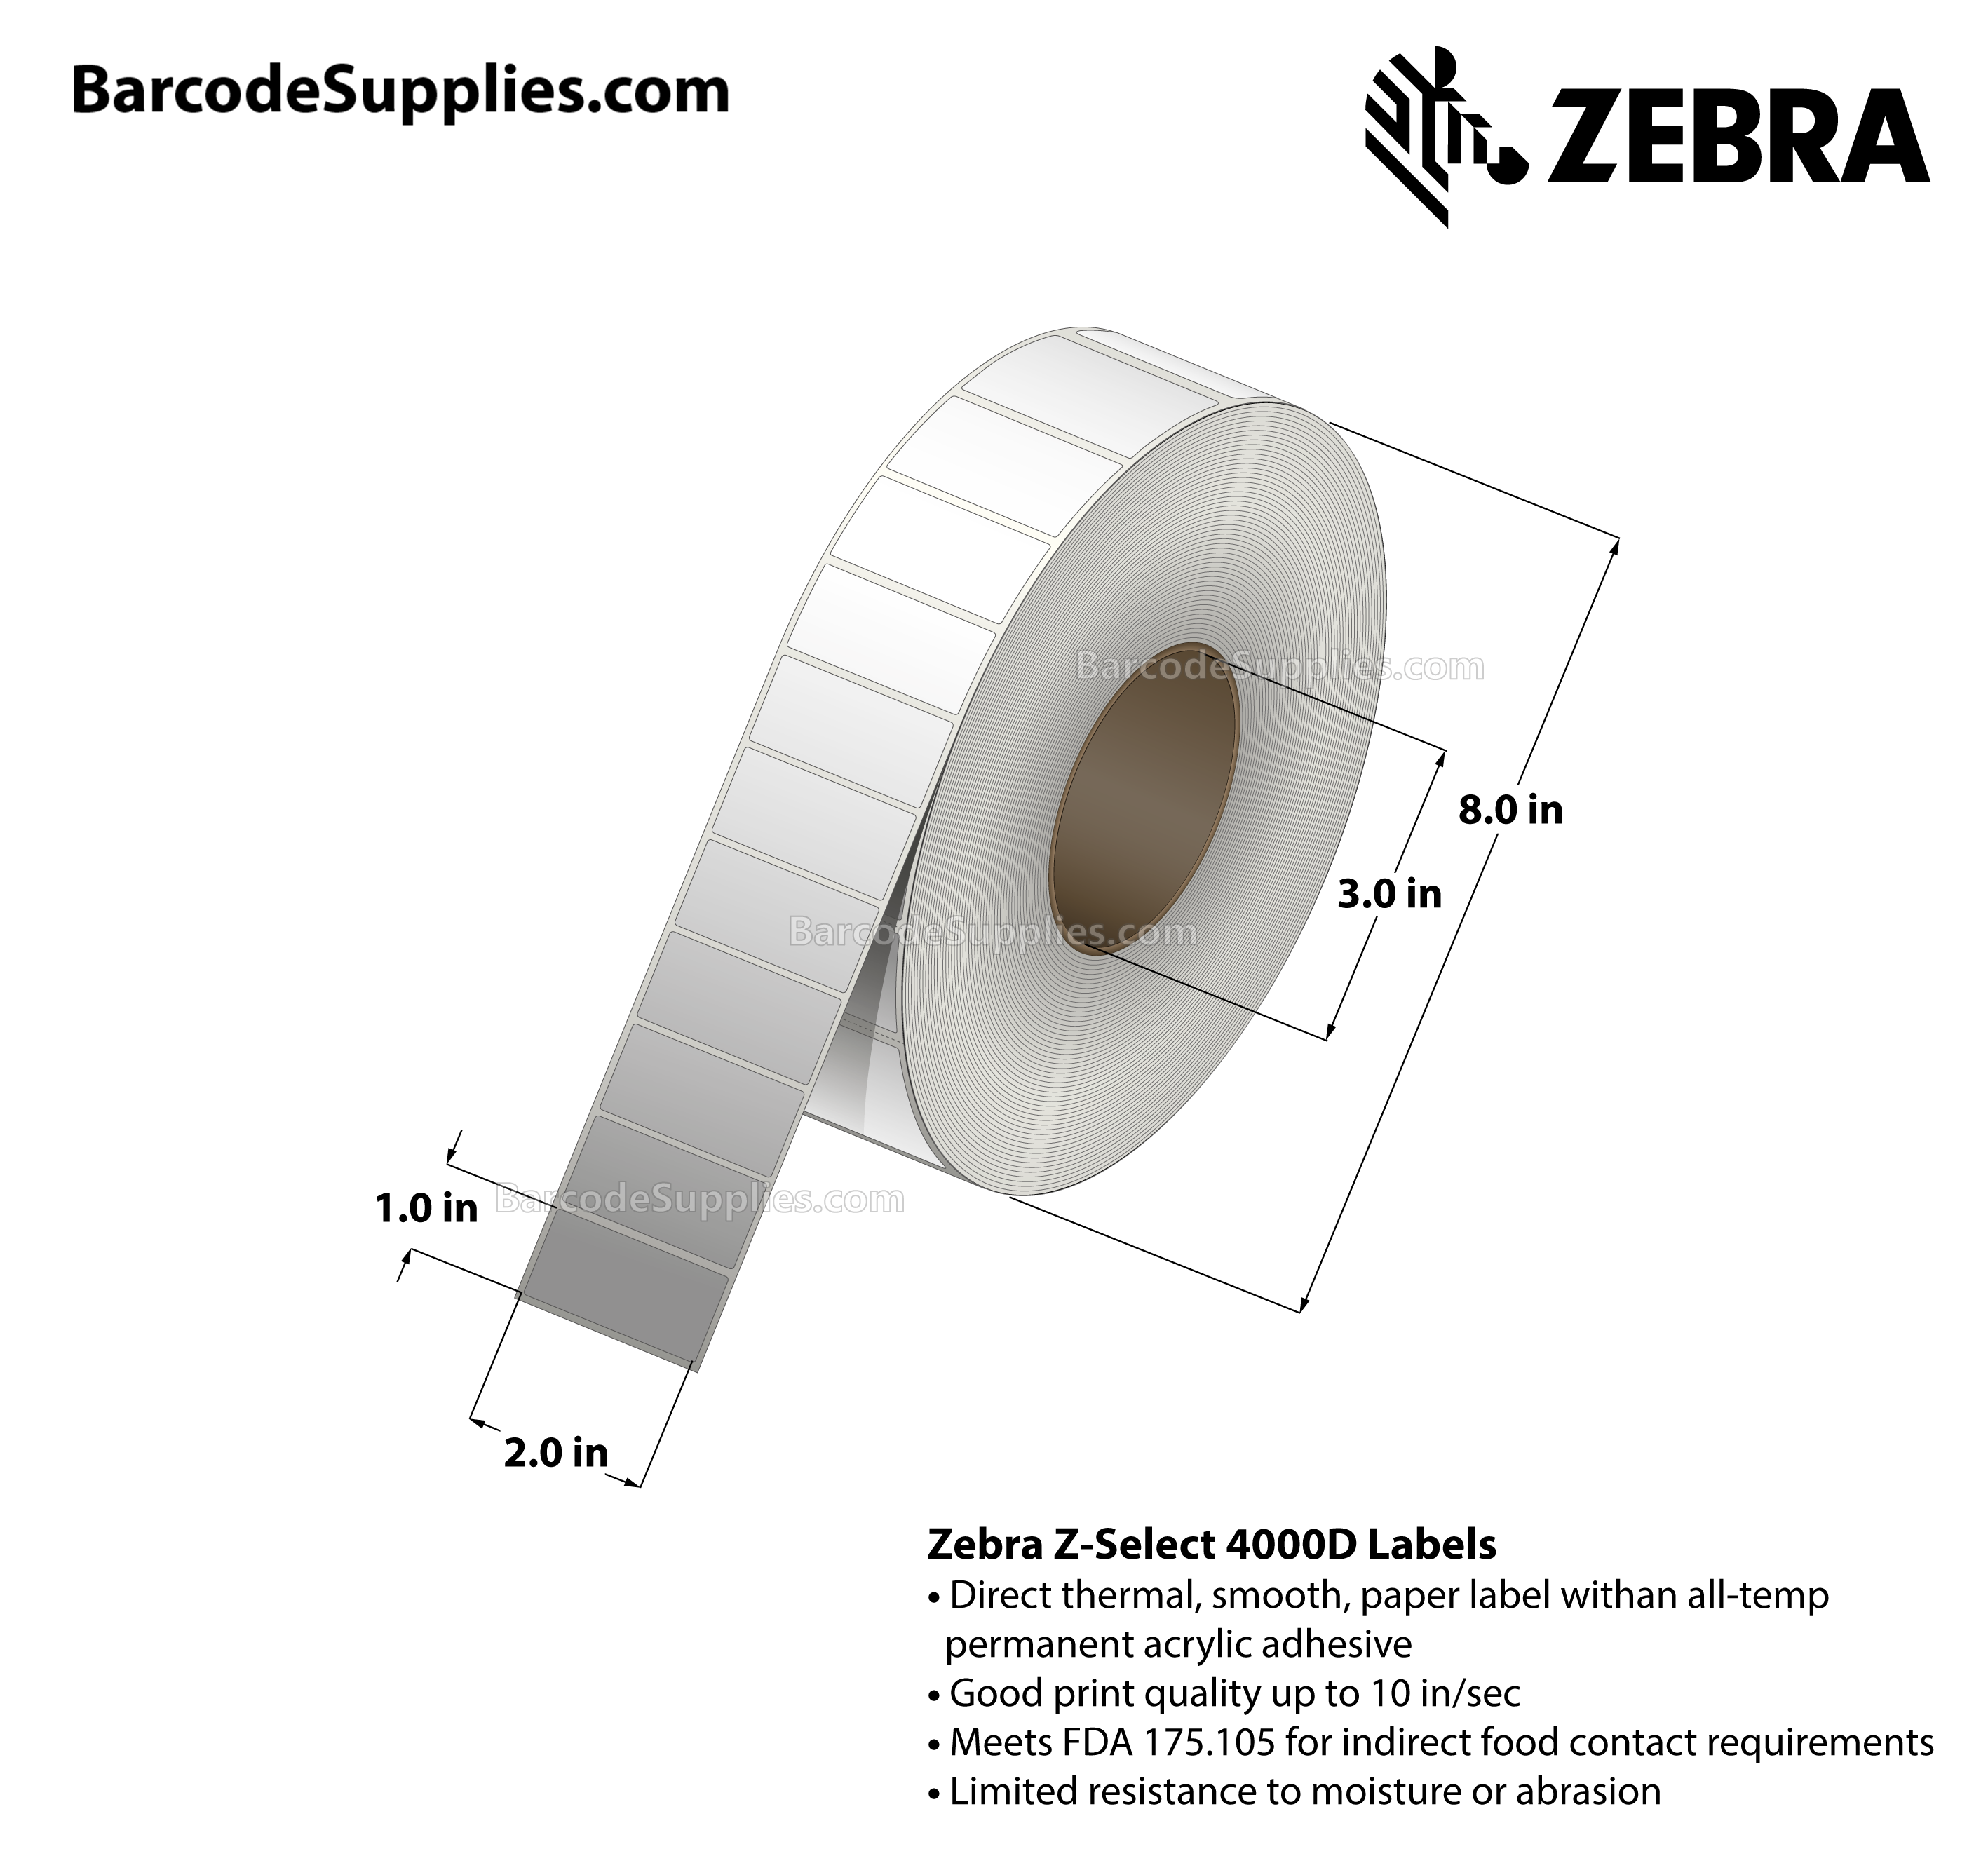 2 x 1 Direct Thermal White Z-Select 4000D Labels With All-Temp Adhesive - Not Perforated - 4620 Labels Per Roll - Carton Of 8 Rolls - 36960 Labels Total - MPN: 72275